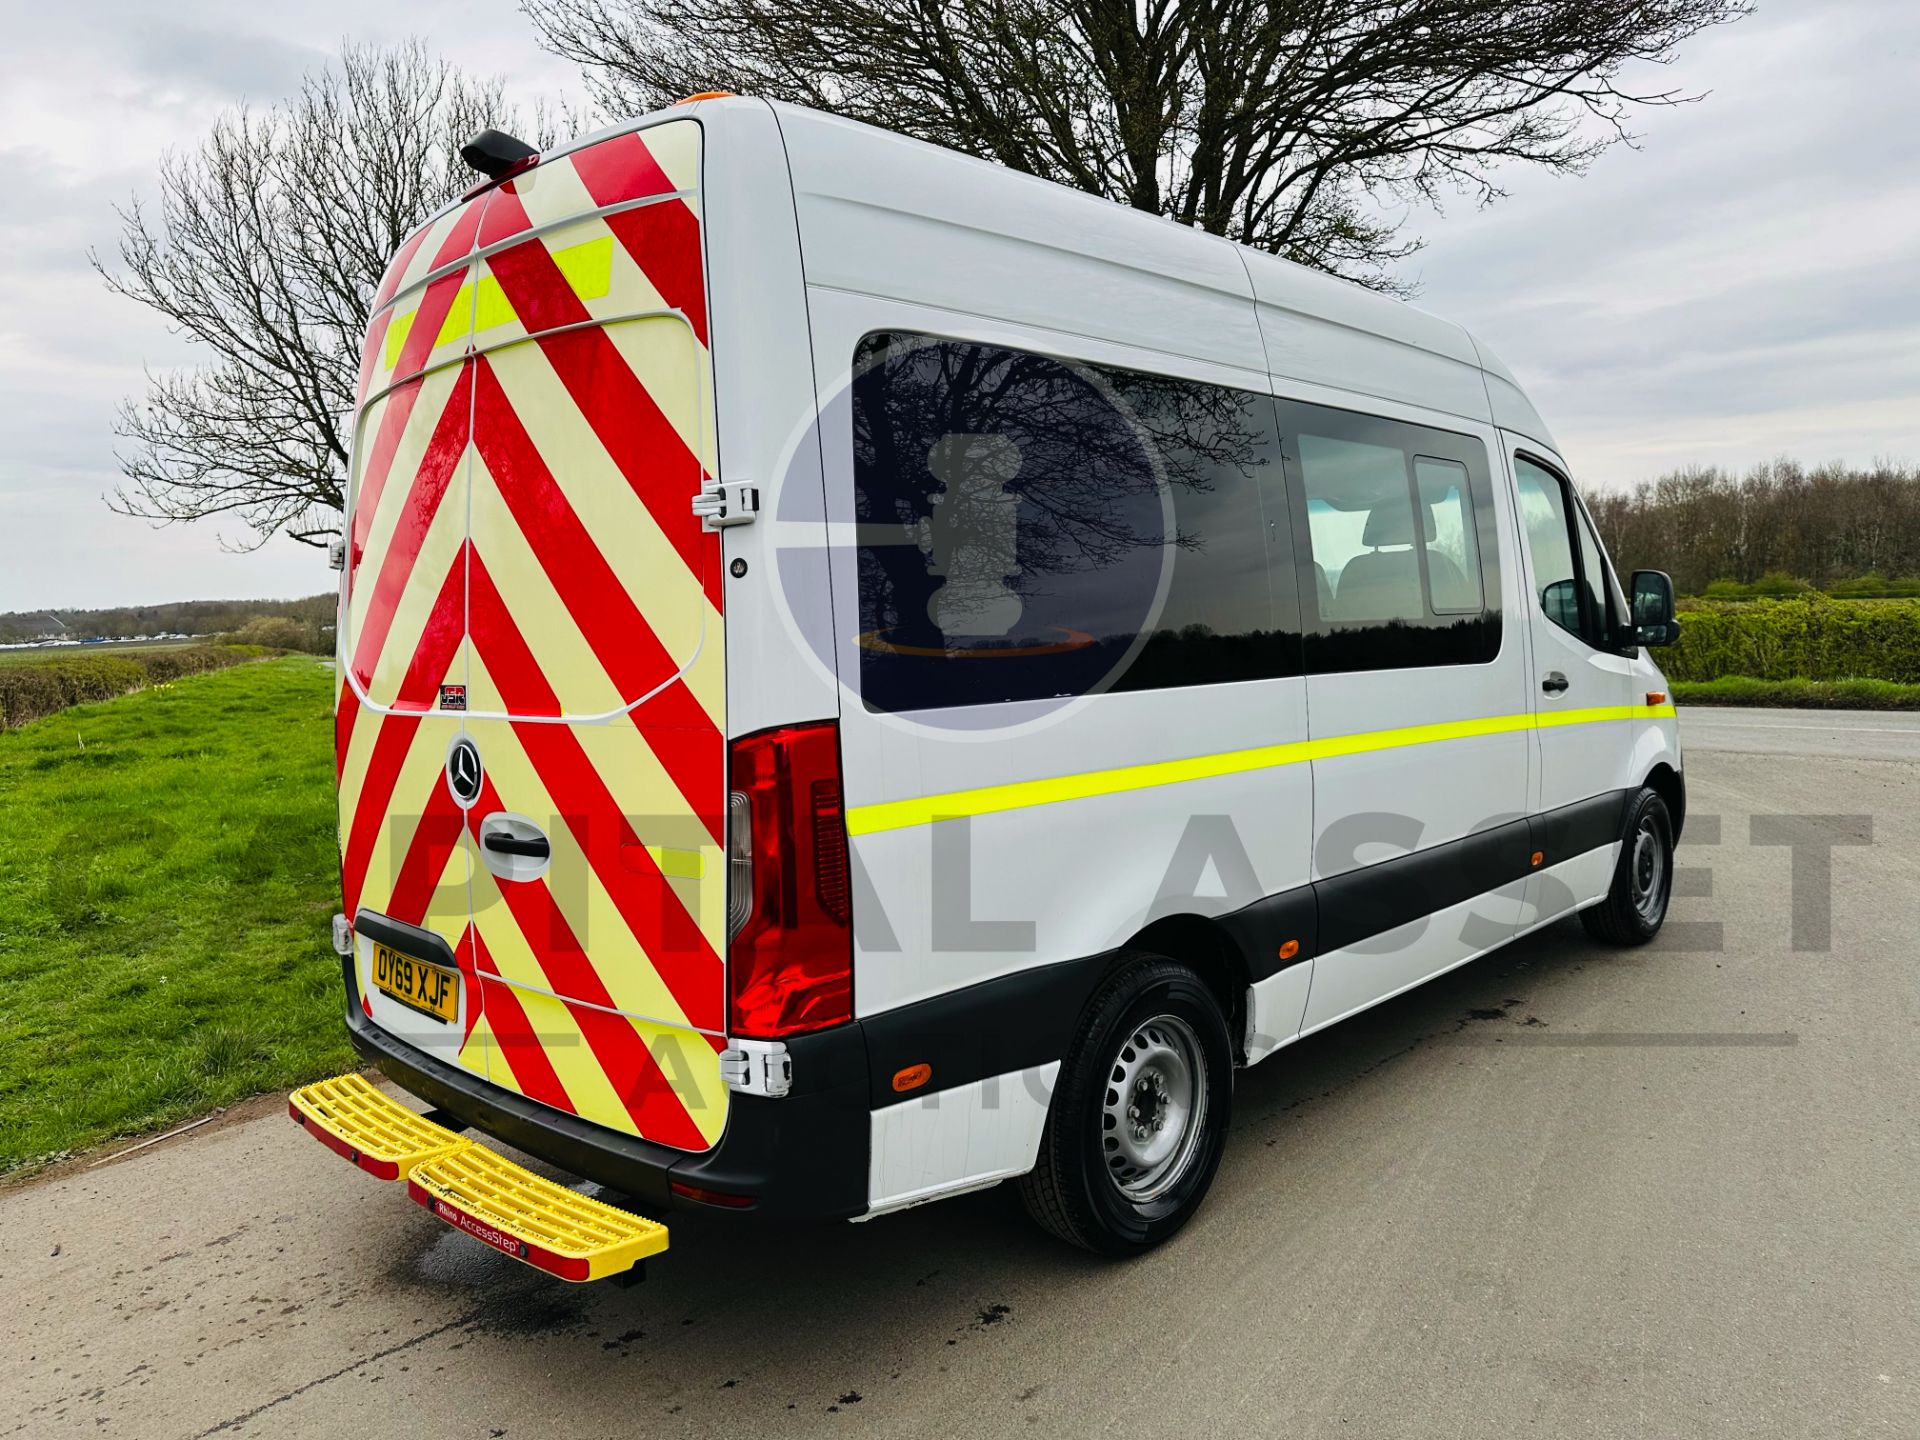 (ON SALE) MERCEDES SPRINTER 314CDI AUTO MWB MESSING UNIT WITH W/C,MICROWAVE,- 2020 REG- - AIR CON - Image 9 of 44